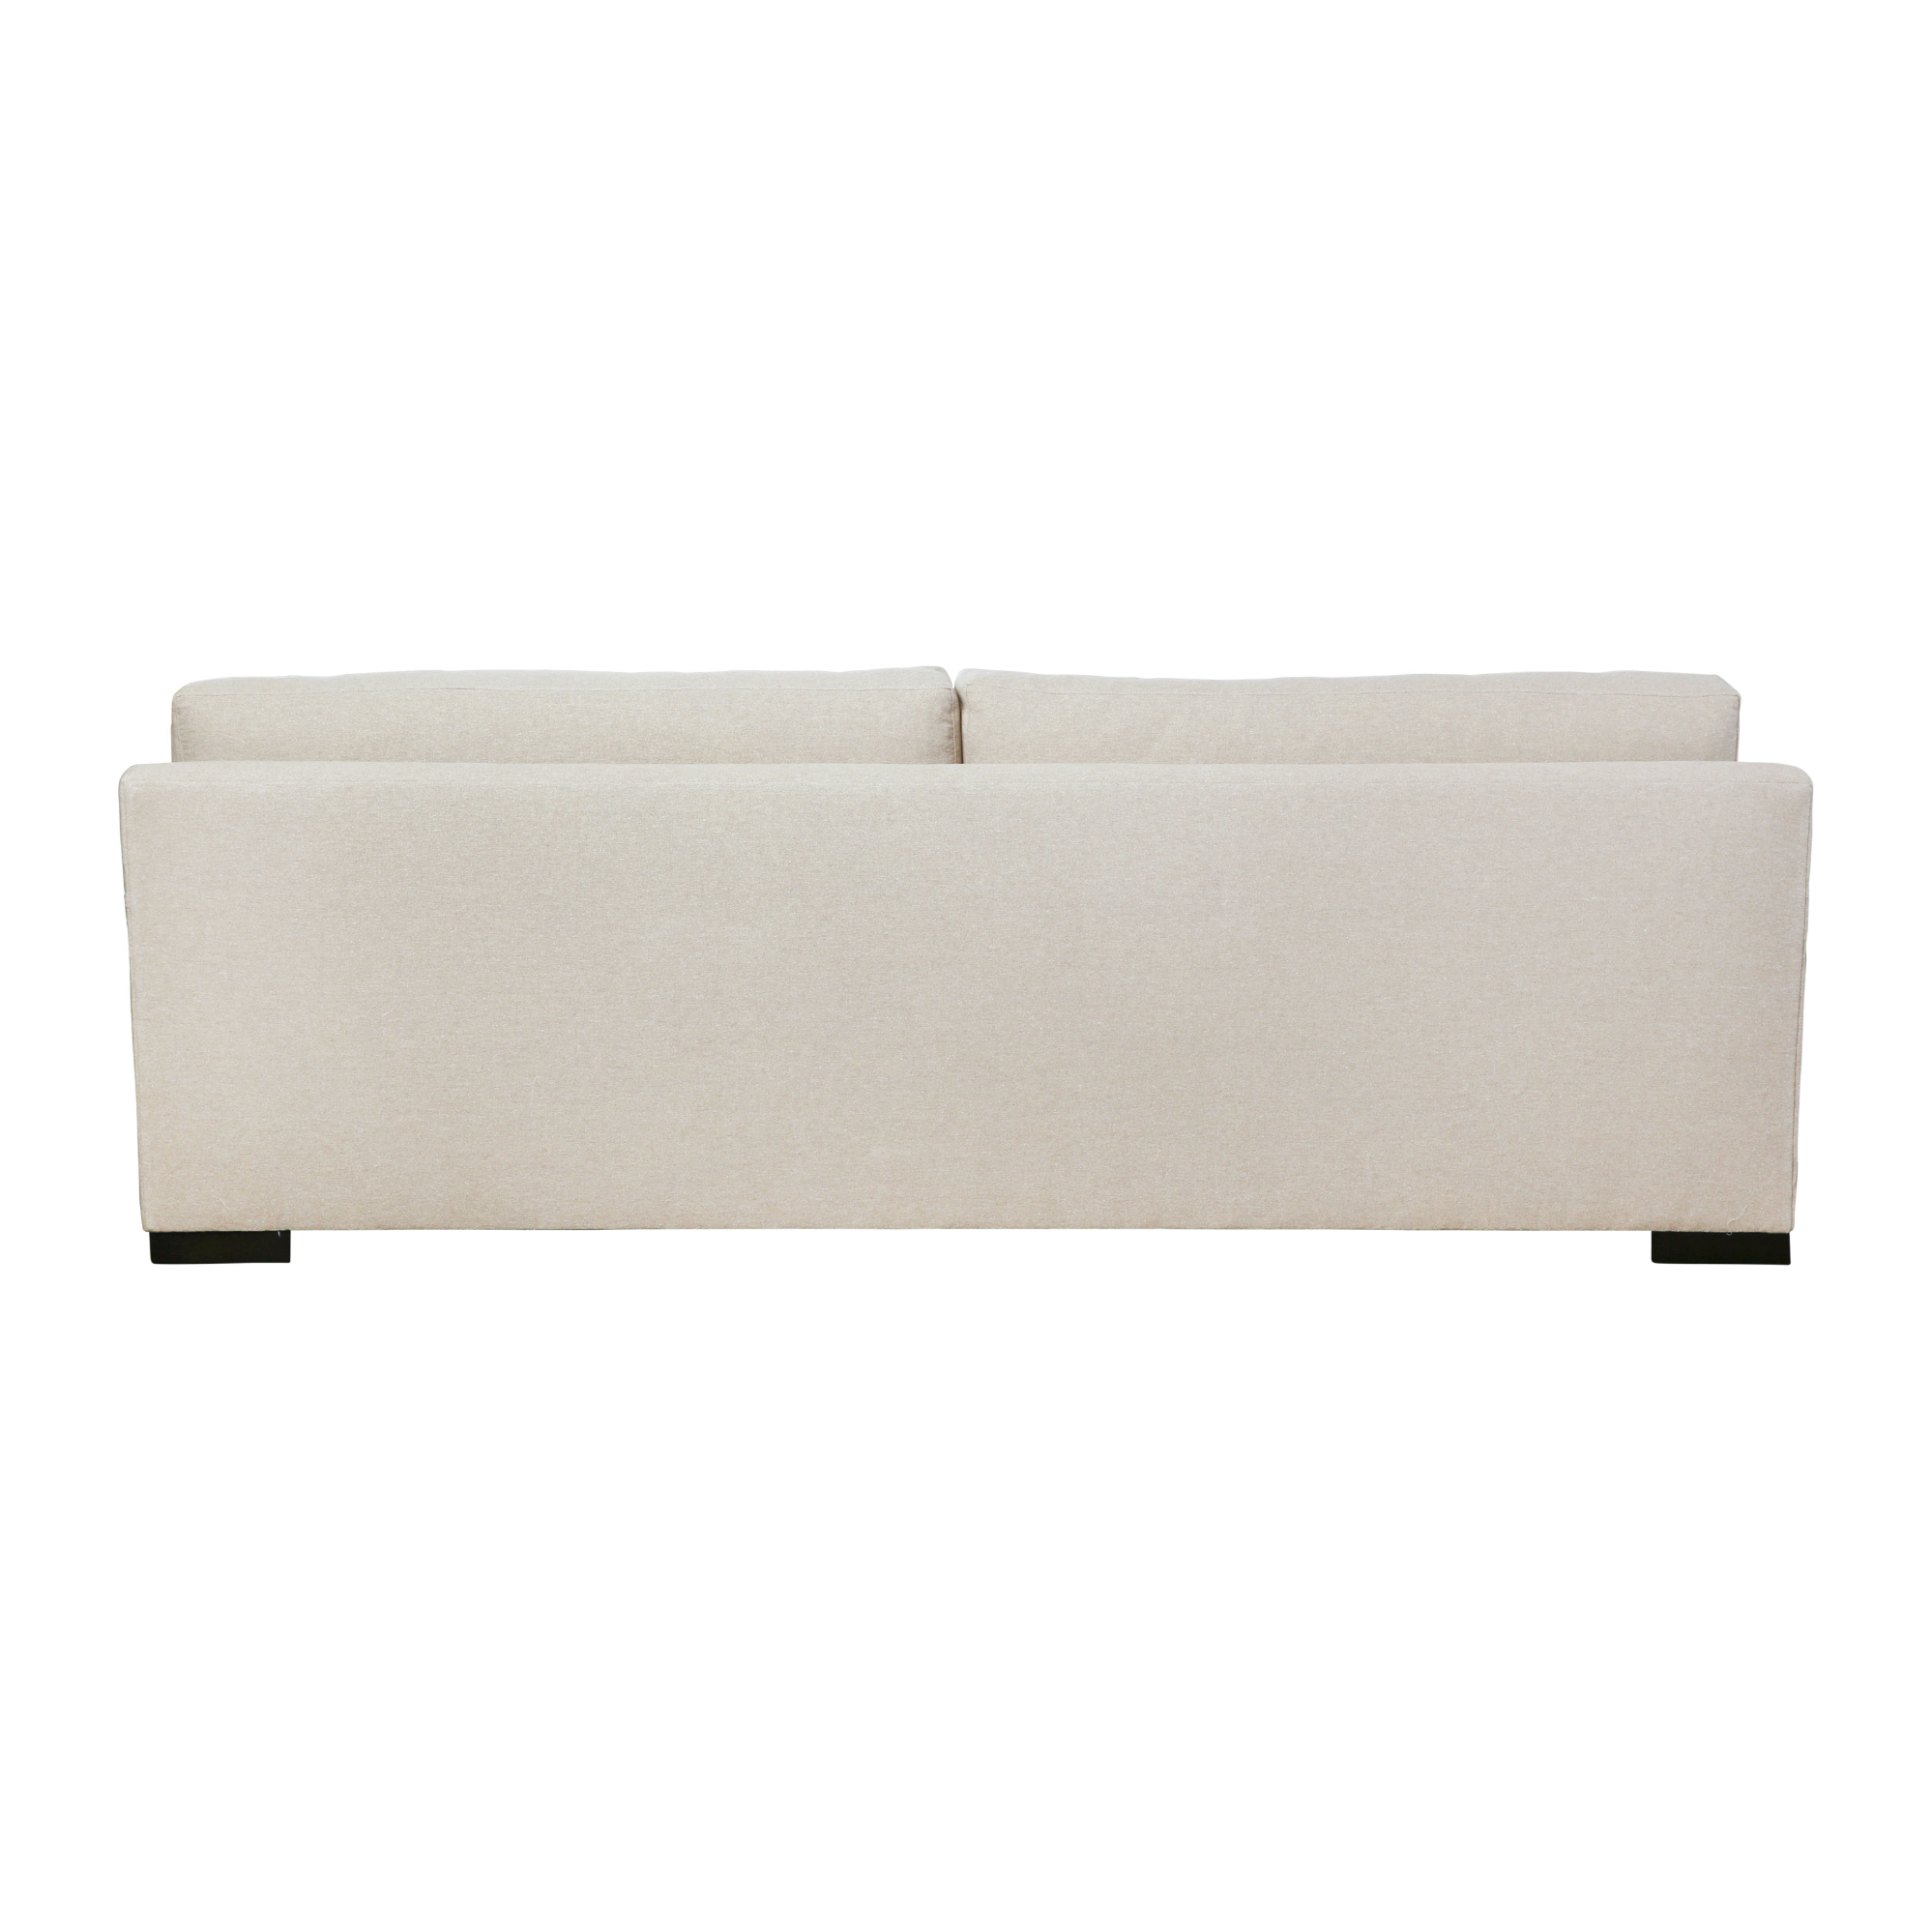 This Loft sofa is a shop favorite -- simply beautiful and so comfortable for the modern family!  Enjoy this sofa upholstered or slipcovered.  Down filled back cushions are a breeze to fluff and reshape. 84"w x 29"h x 40"d Seat Space: 66"w x 25"d x 20"h